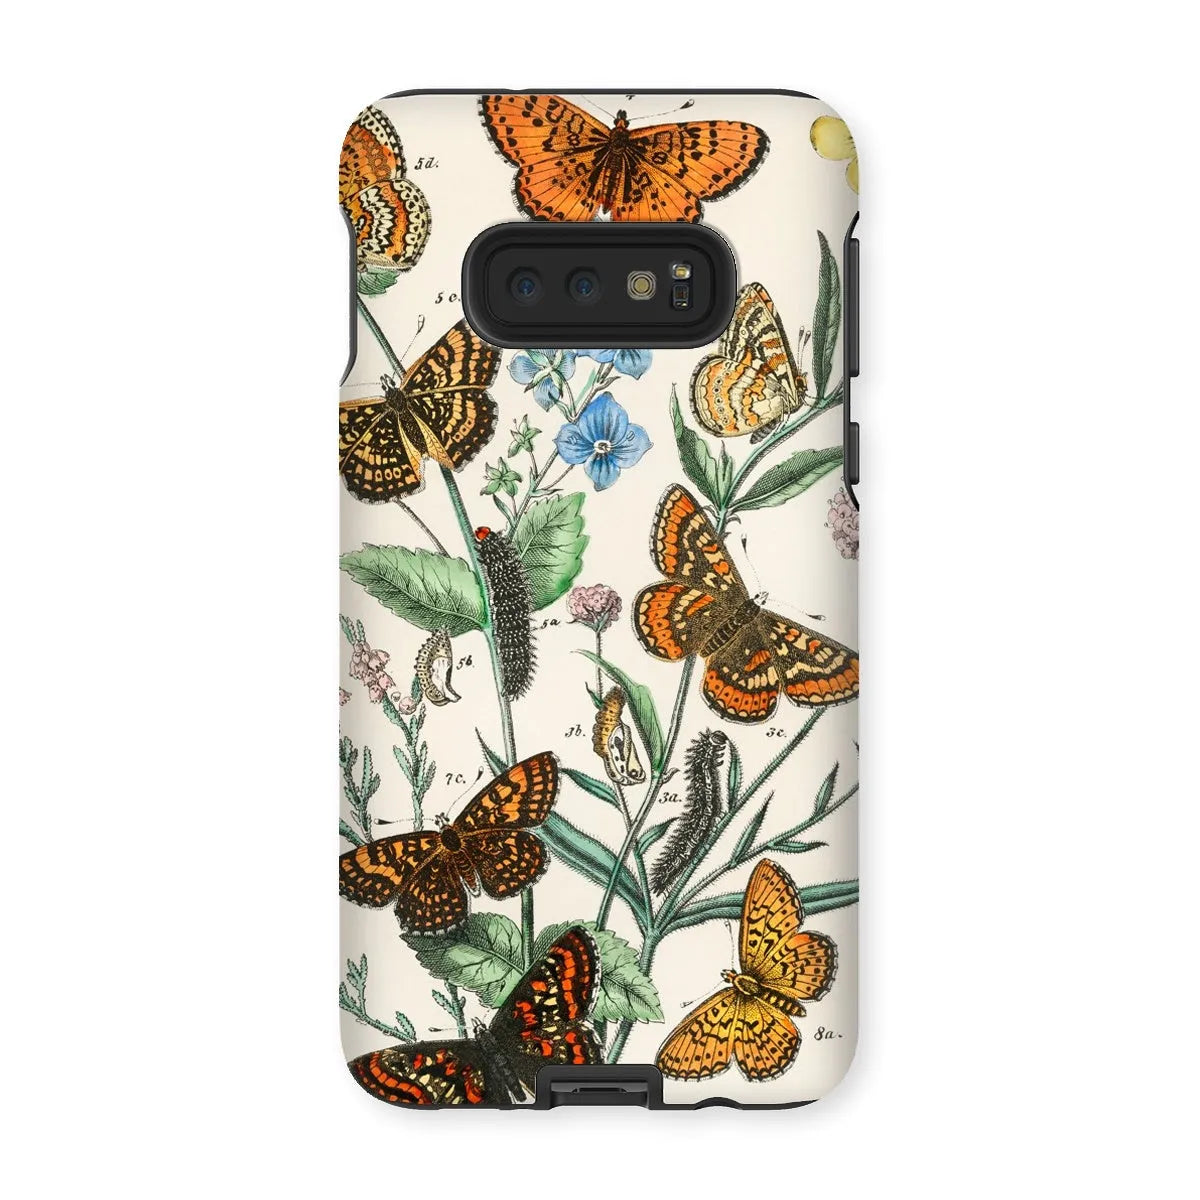 This Butterfly Aesthetic Art Phone Case - William Forsell Kirby - Samsung Galaxy S10e / Matte - Mobile Phone Cases